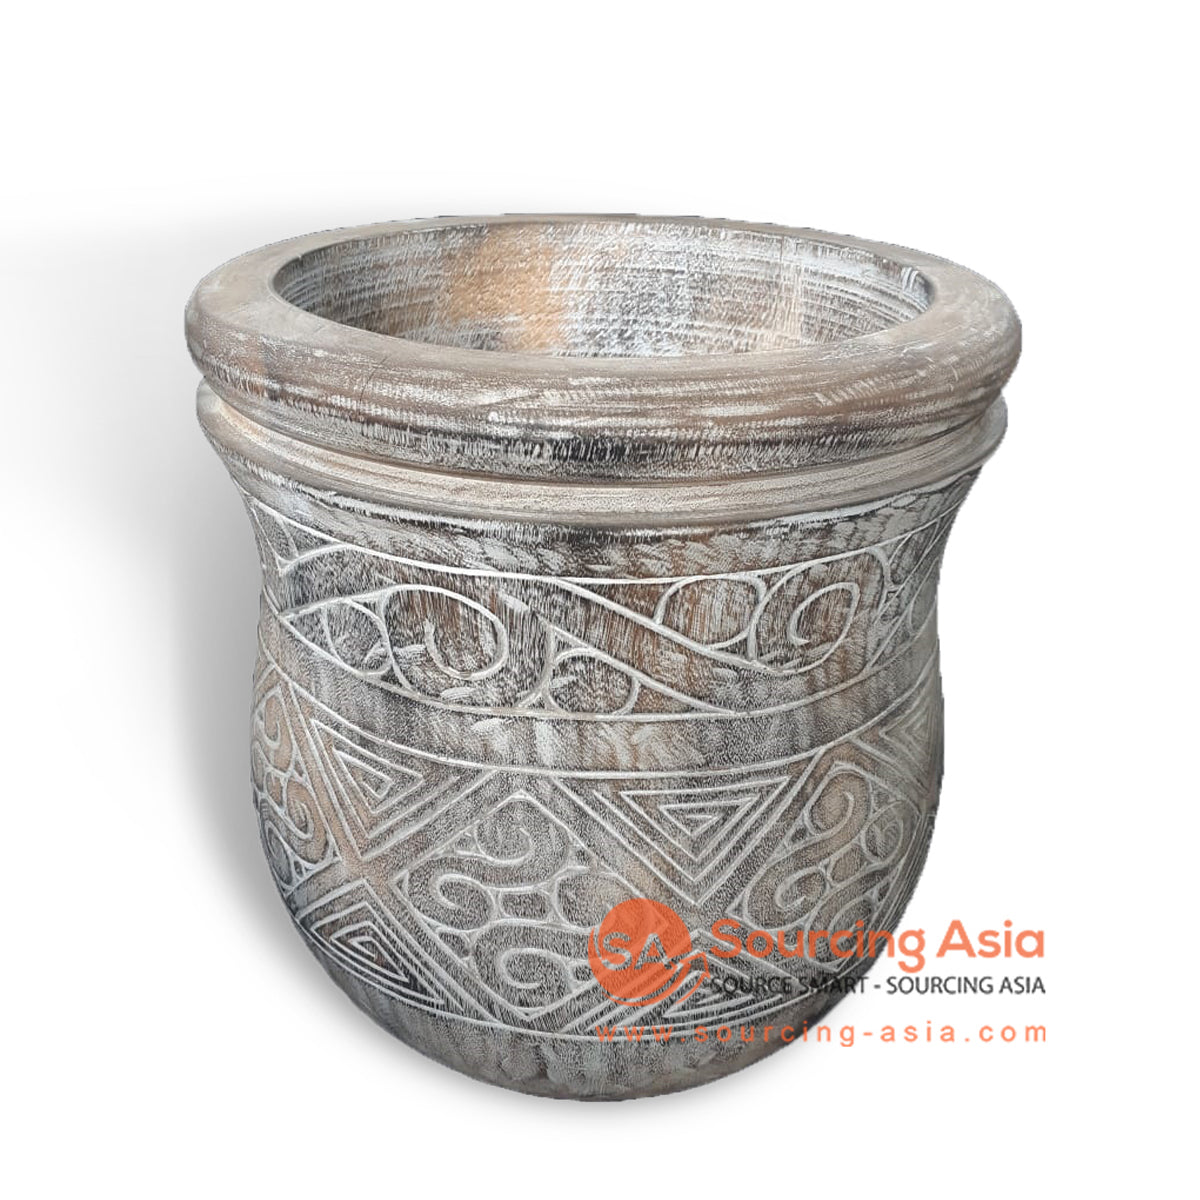 ATY005-1 WHITE WASH SUAR WOOD TRIBAL CARVED WOODEN POT